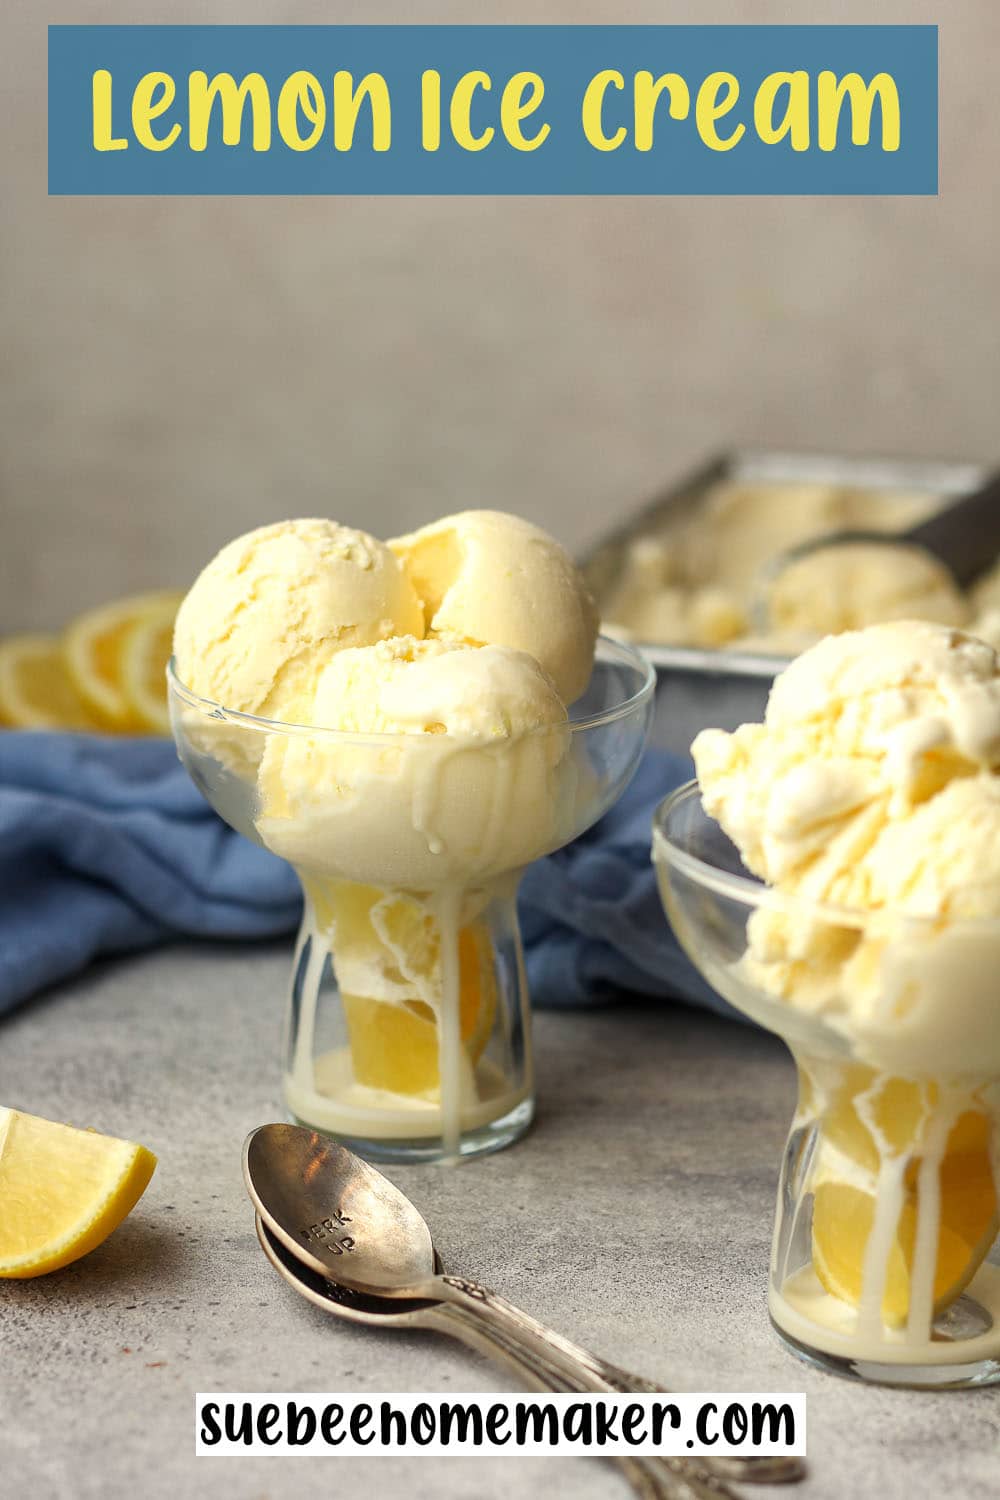 Side view of two dishes of lemon ice cream.